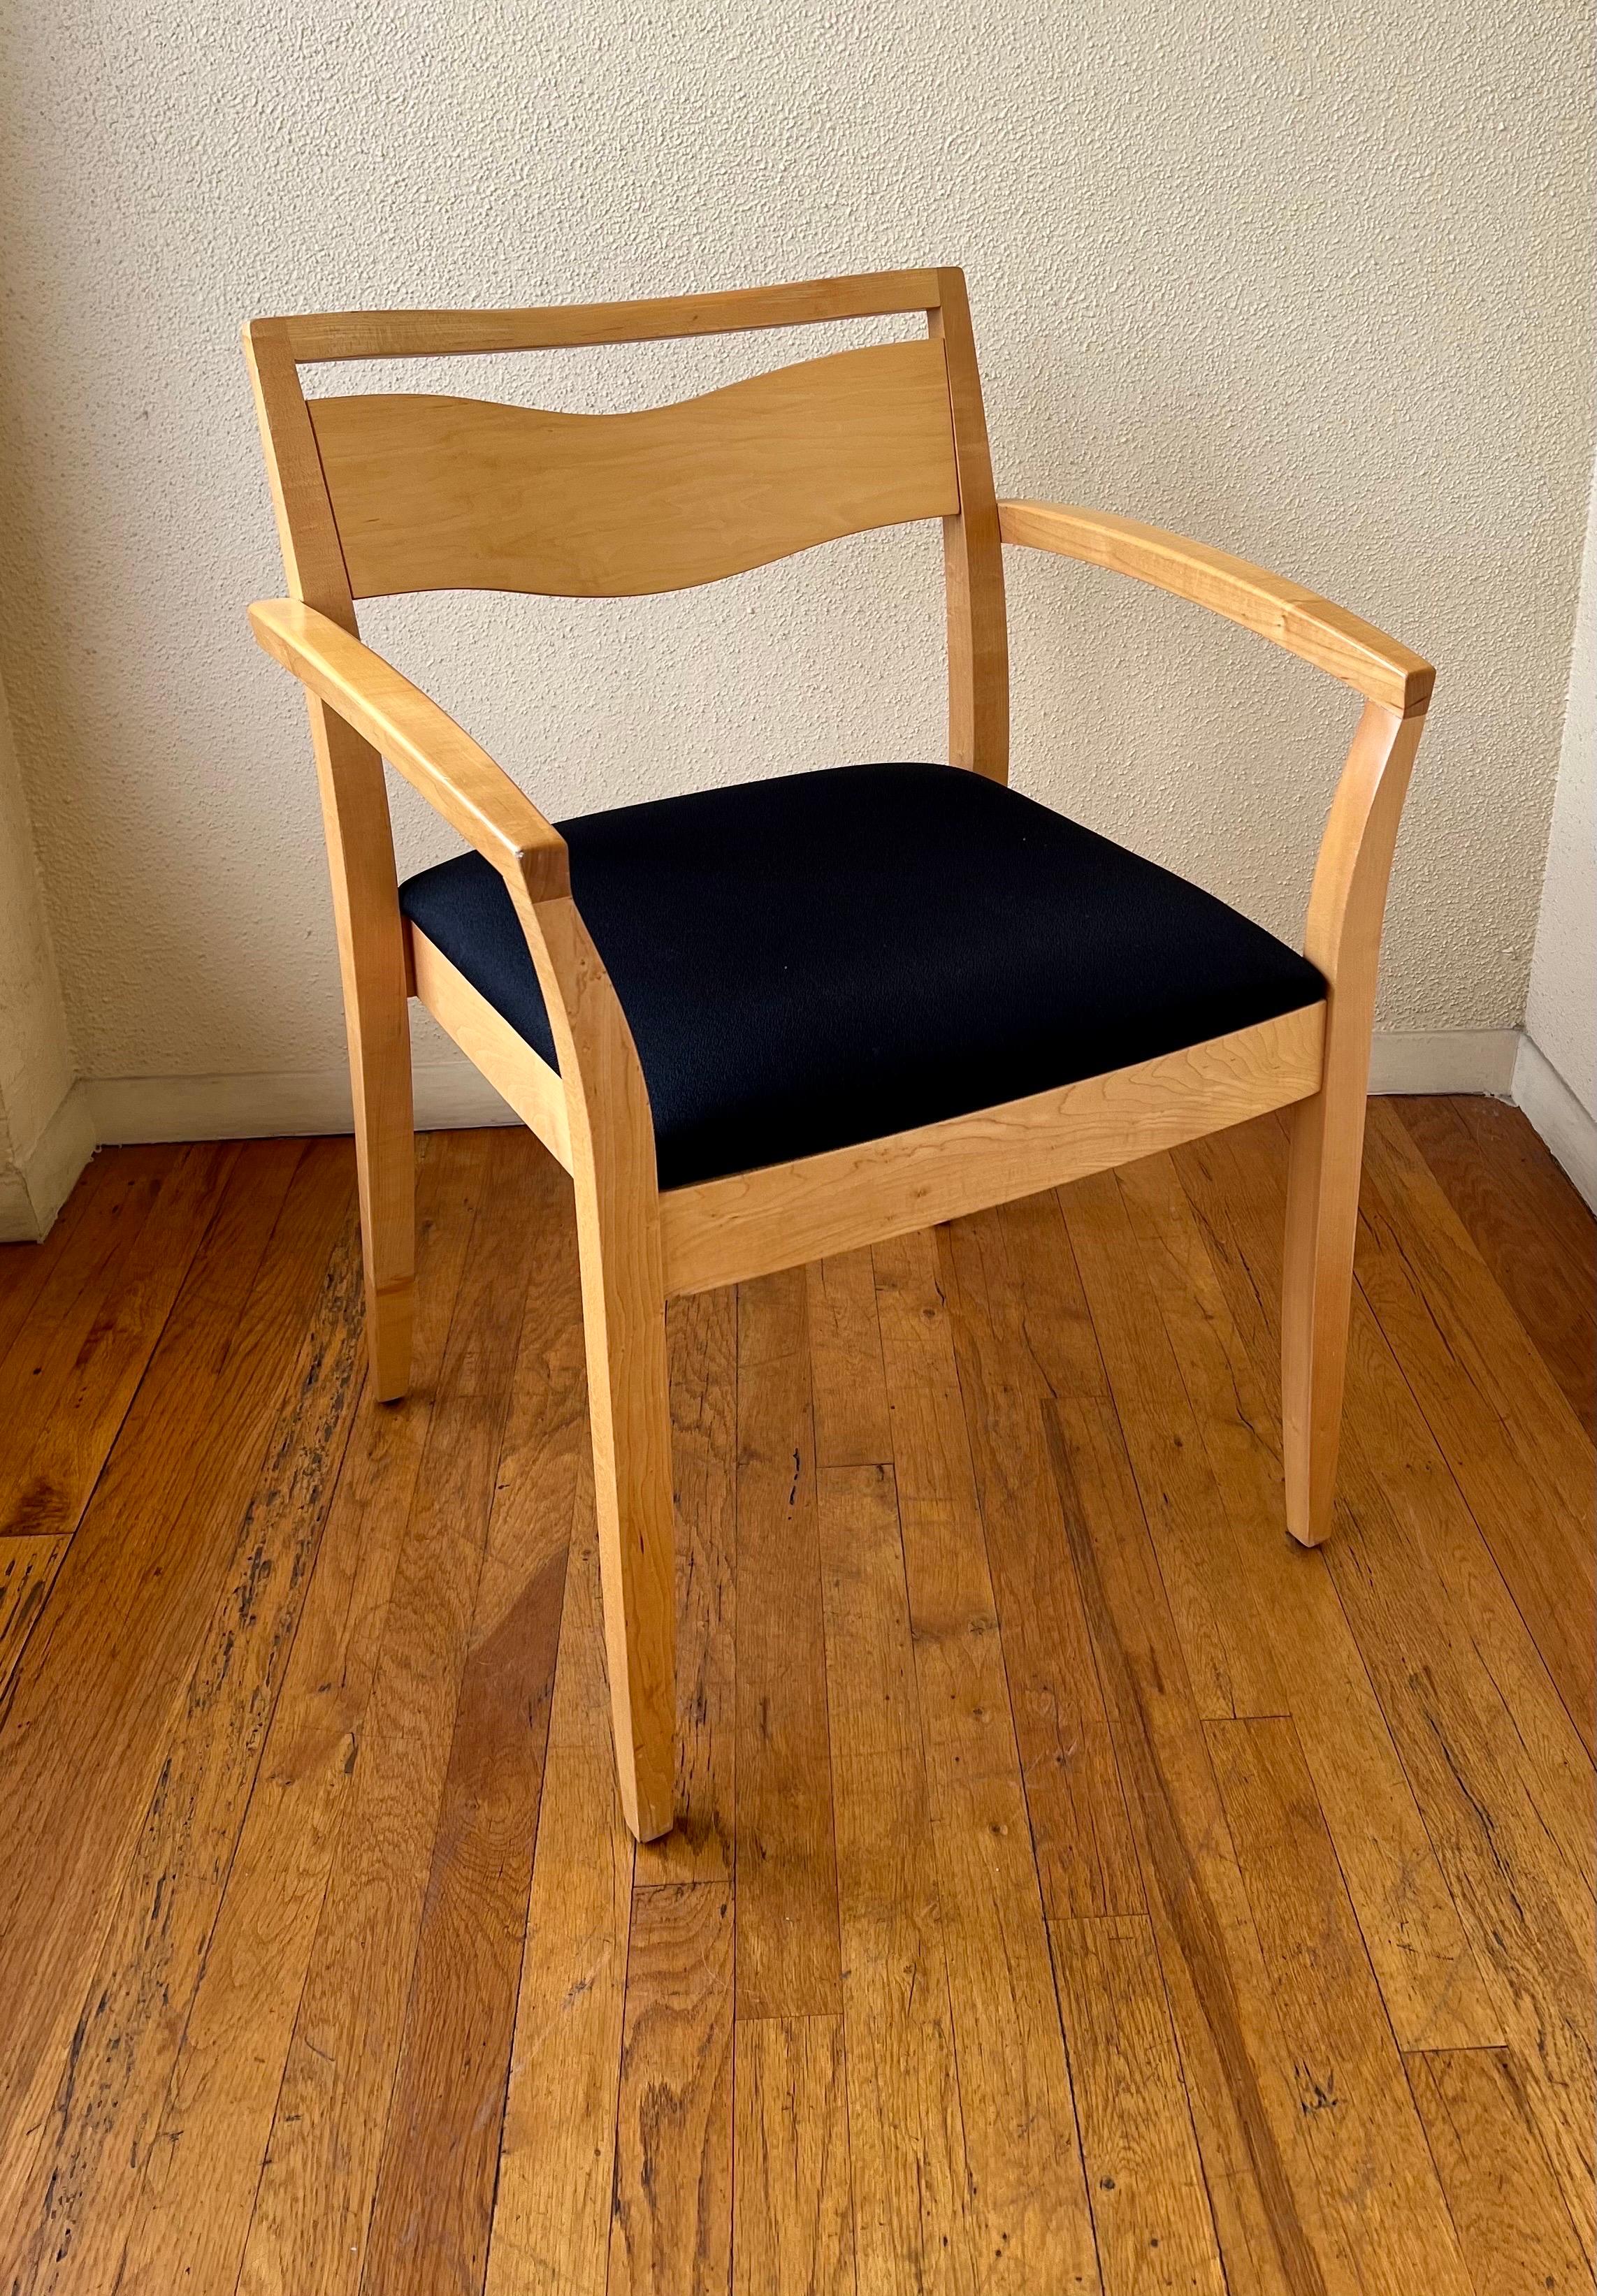 American Midcentury Knoll Studio Armchair by Linda & Joseph Ricchio In Excellent Condition For Sale In San Diego, CA